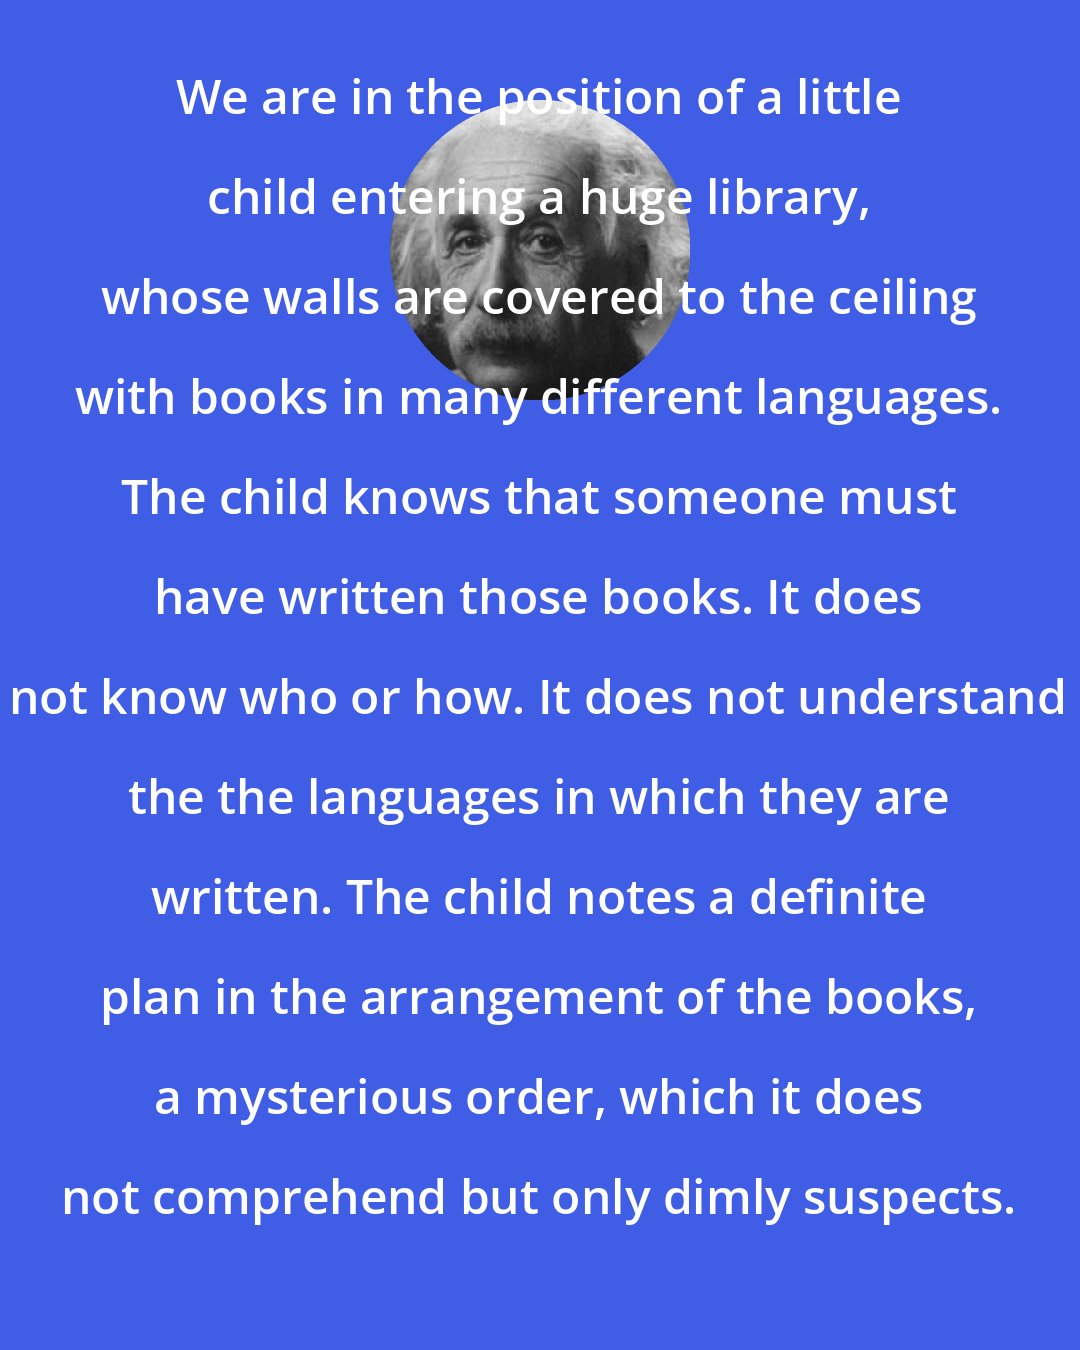 Albert Einstein: We are in the position of a little child entering a huge library, whose walls are covered to the ceiling with books in many different languages. The child knows that someone must have written those books. It does not know who or how. It does not understand the the languages in which they are written. The child notes a definite plan in the arrangement of the books, a mysterious order, which it does not comprehend but only dimly suspects.